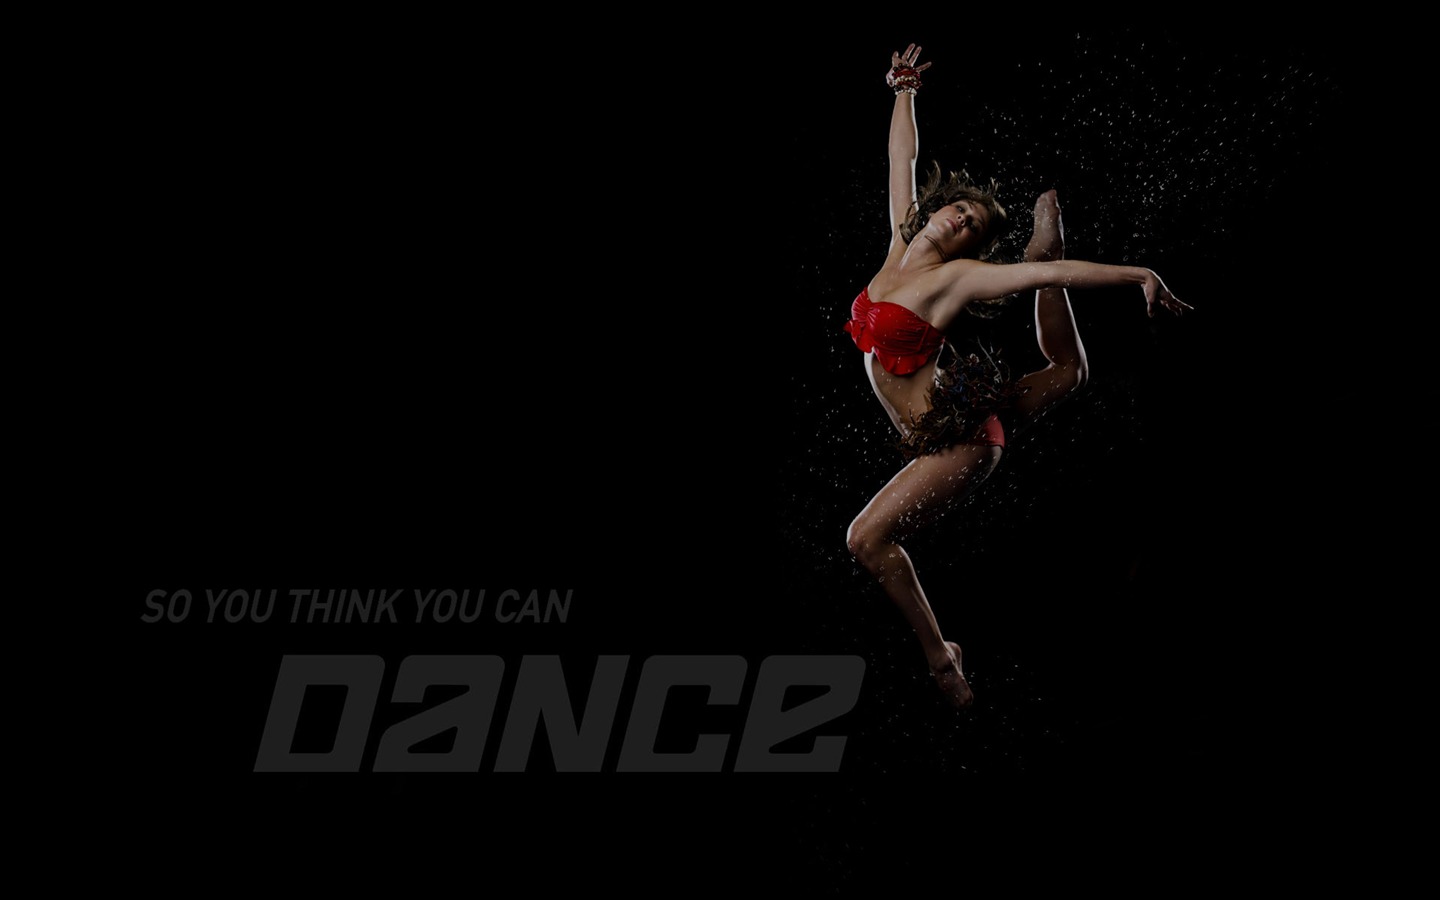 So You Think You Can Dance 舞林爭霸壁紙(二) #13 - 1440x900